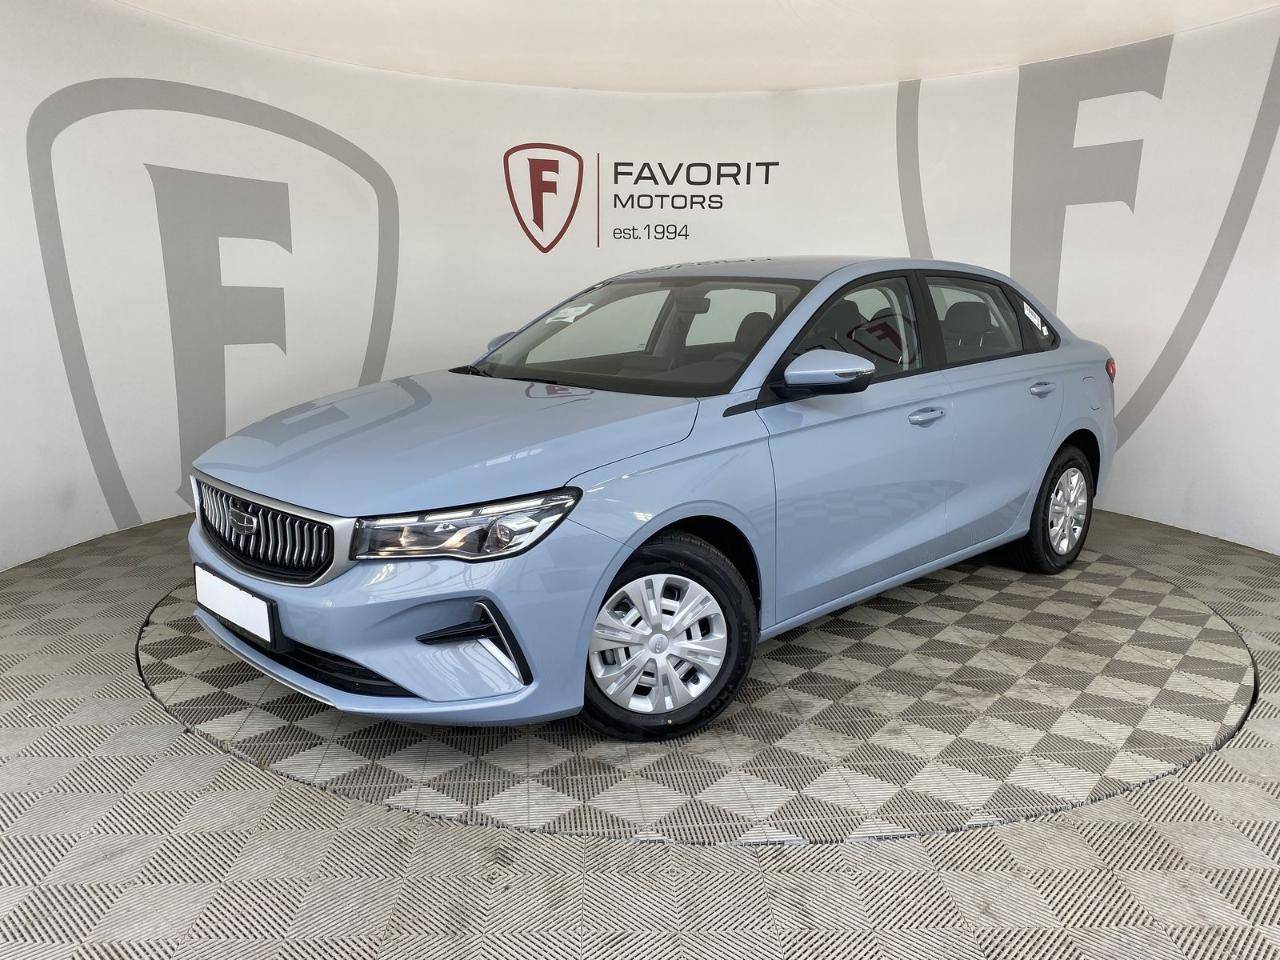 Geely Emgrand 7 Flagship 1.5 АТ 